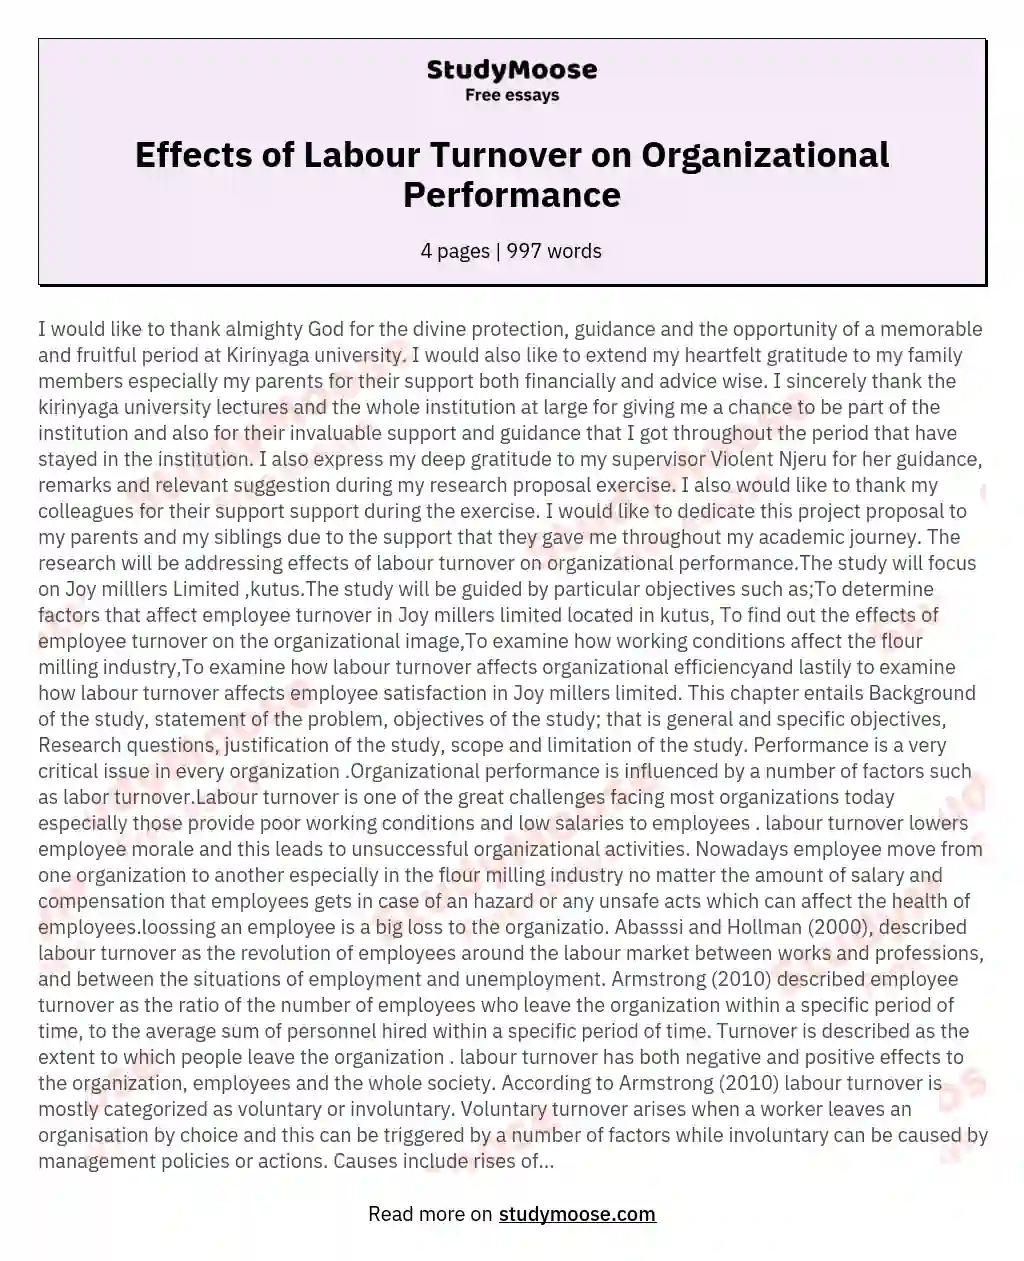 Effects of Labour Turnover on Organizational Performance essay